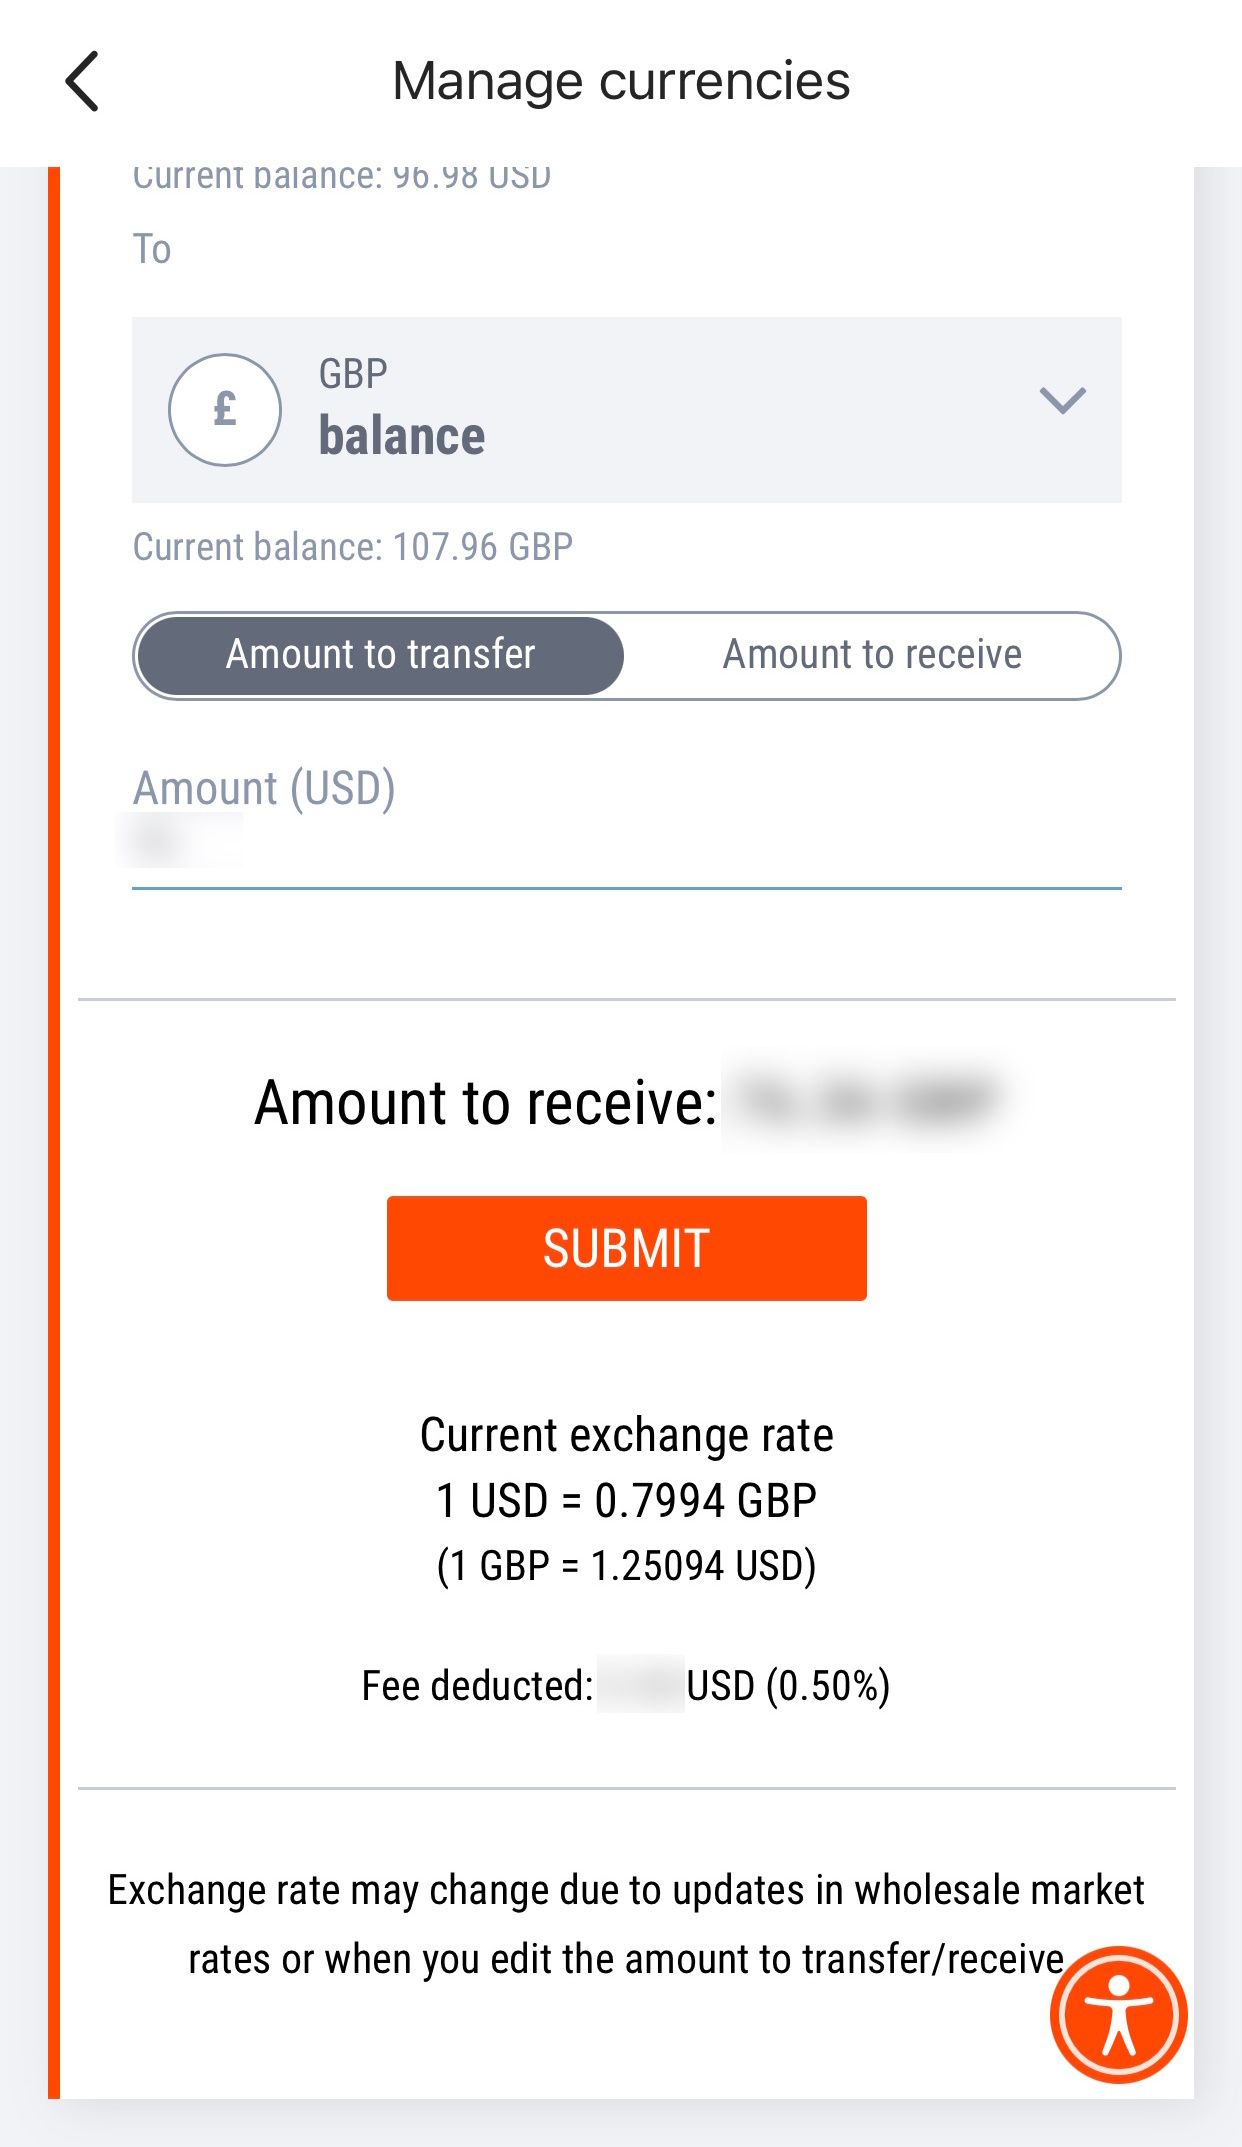 reviewing balance transfer information on the Manage Currencies page in the Payoneer app